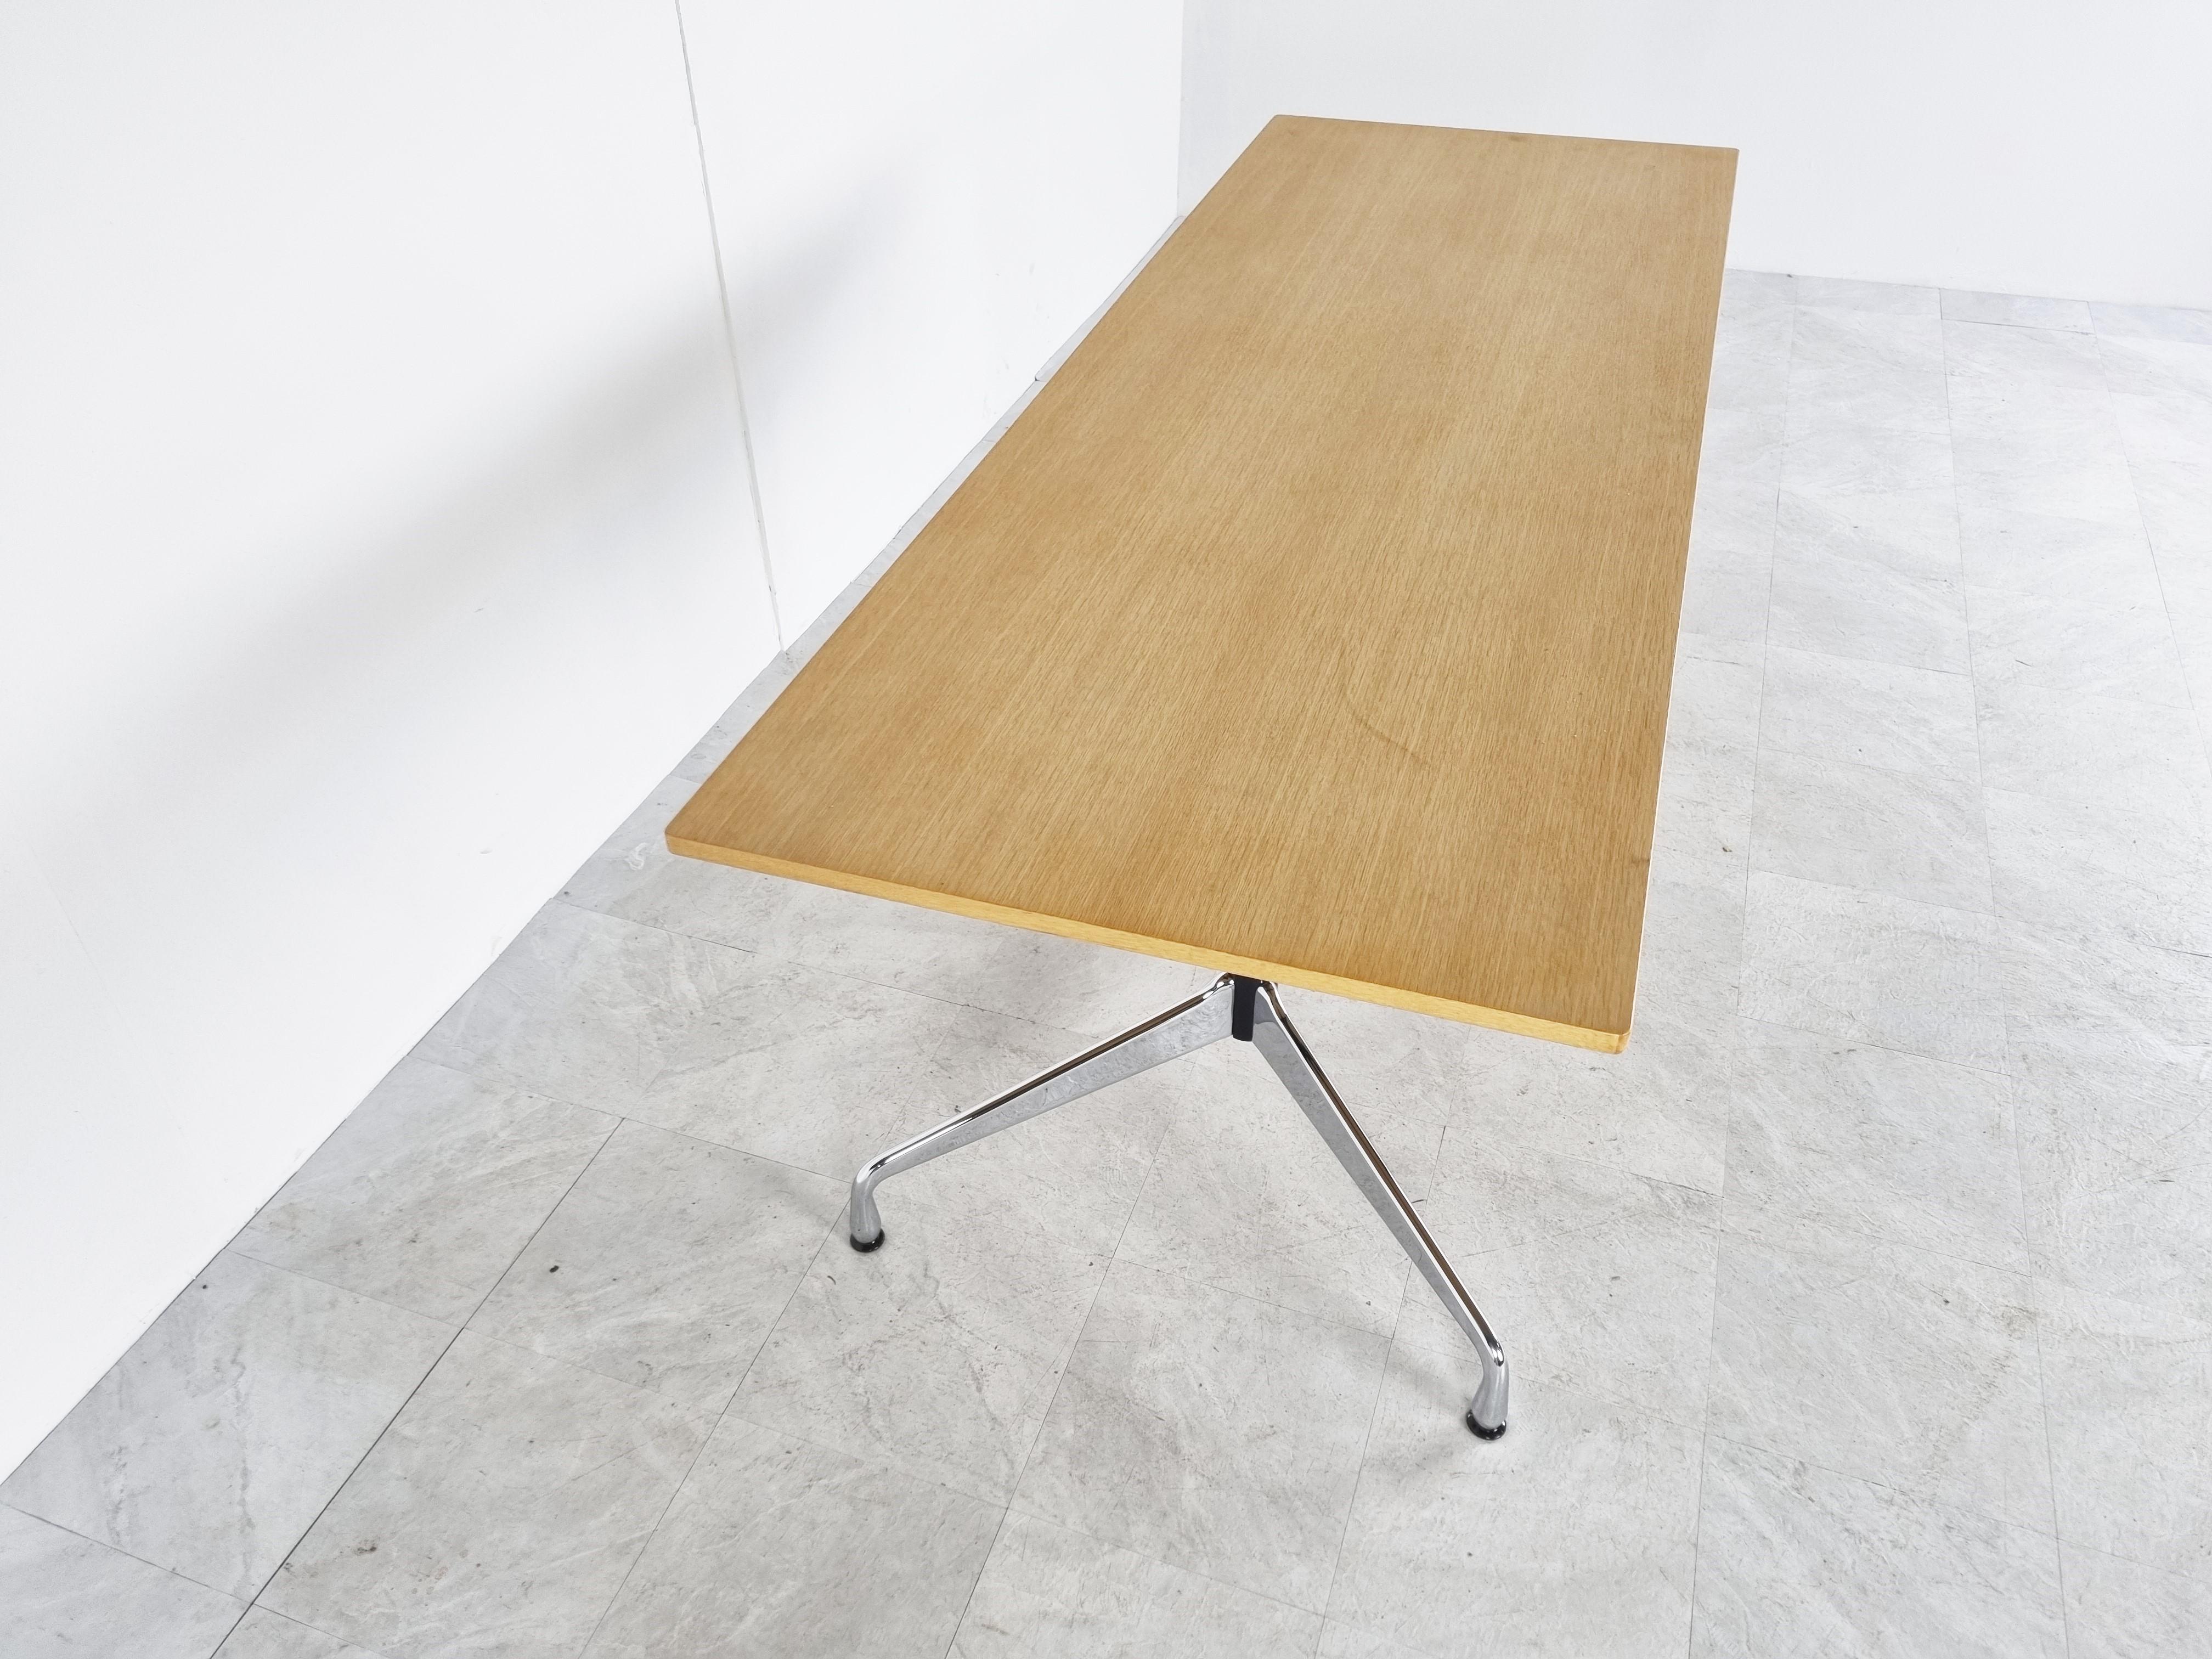 Segmented dining table or desk by Charles and Ray Eames for Vitra

Nice and sturdy wooden top with a chromed aluminum base.

The table is in good condition.

1990s - USA

Measures: Height: 72cm/28.34